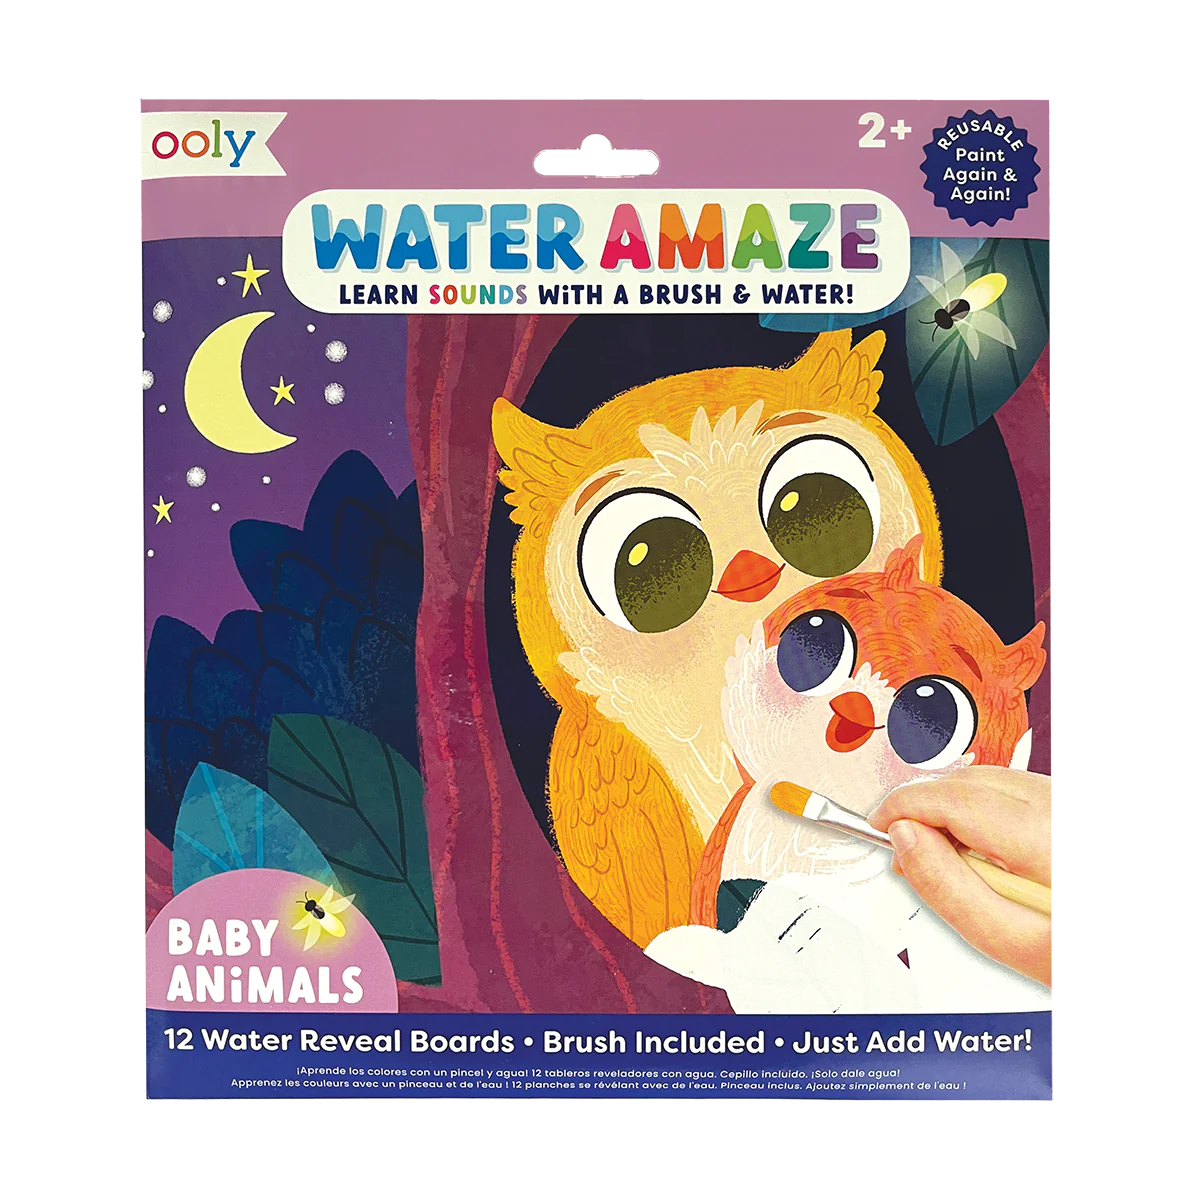 Water Amaze Water Reveal Boards - Baby Animals